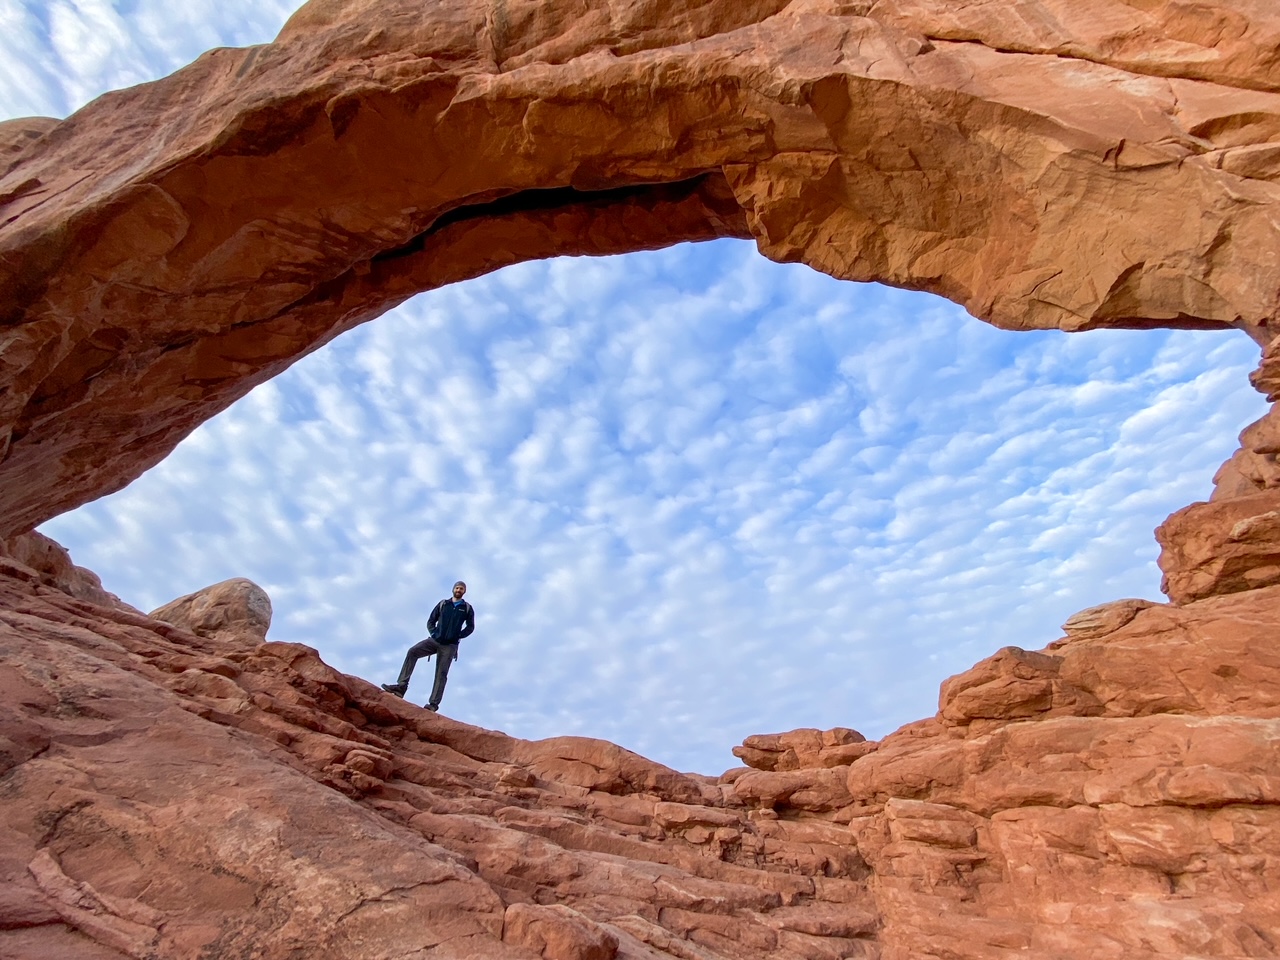 standing under the North Window at Arches National Park